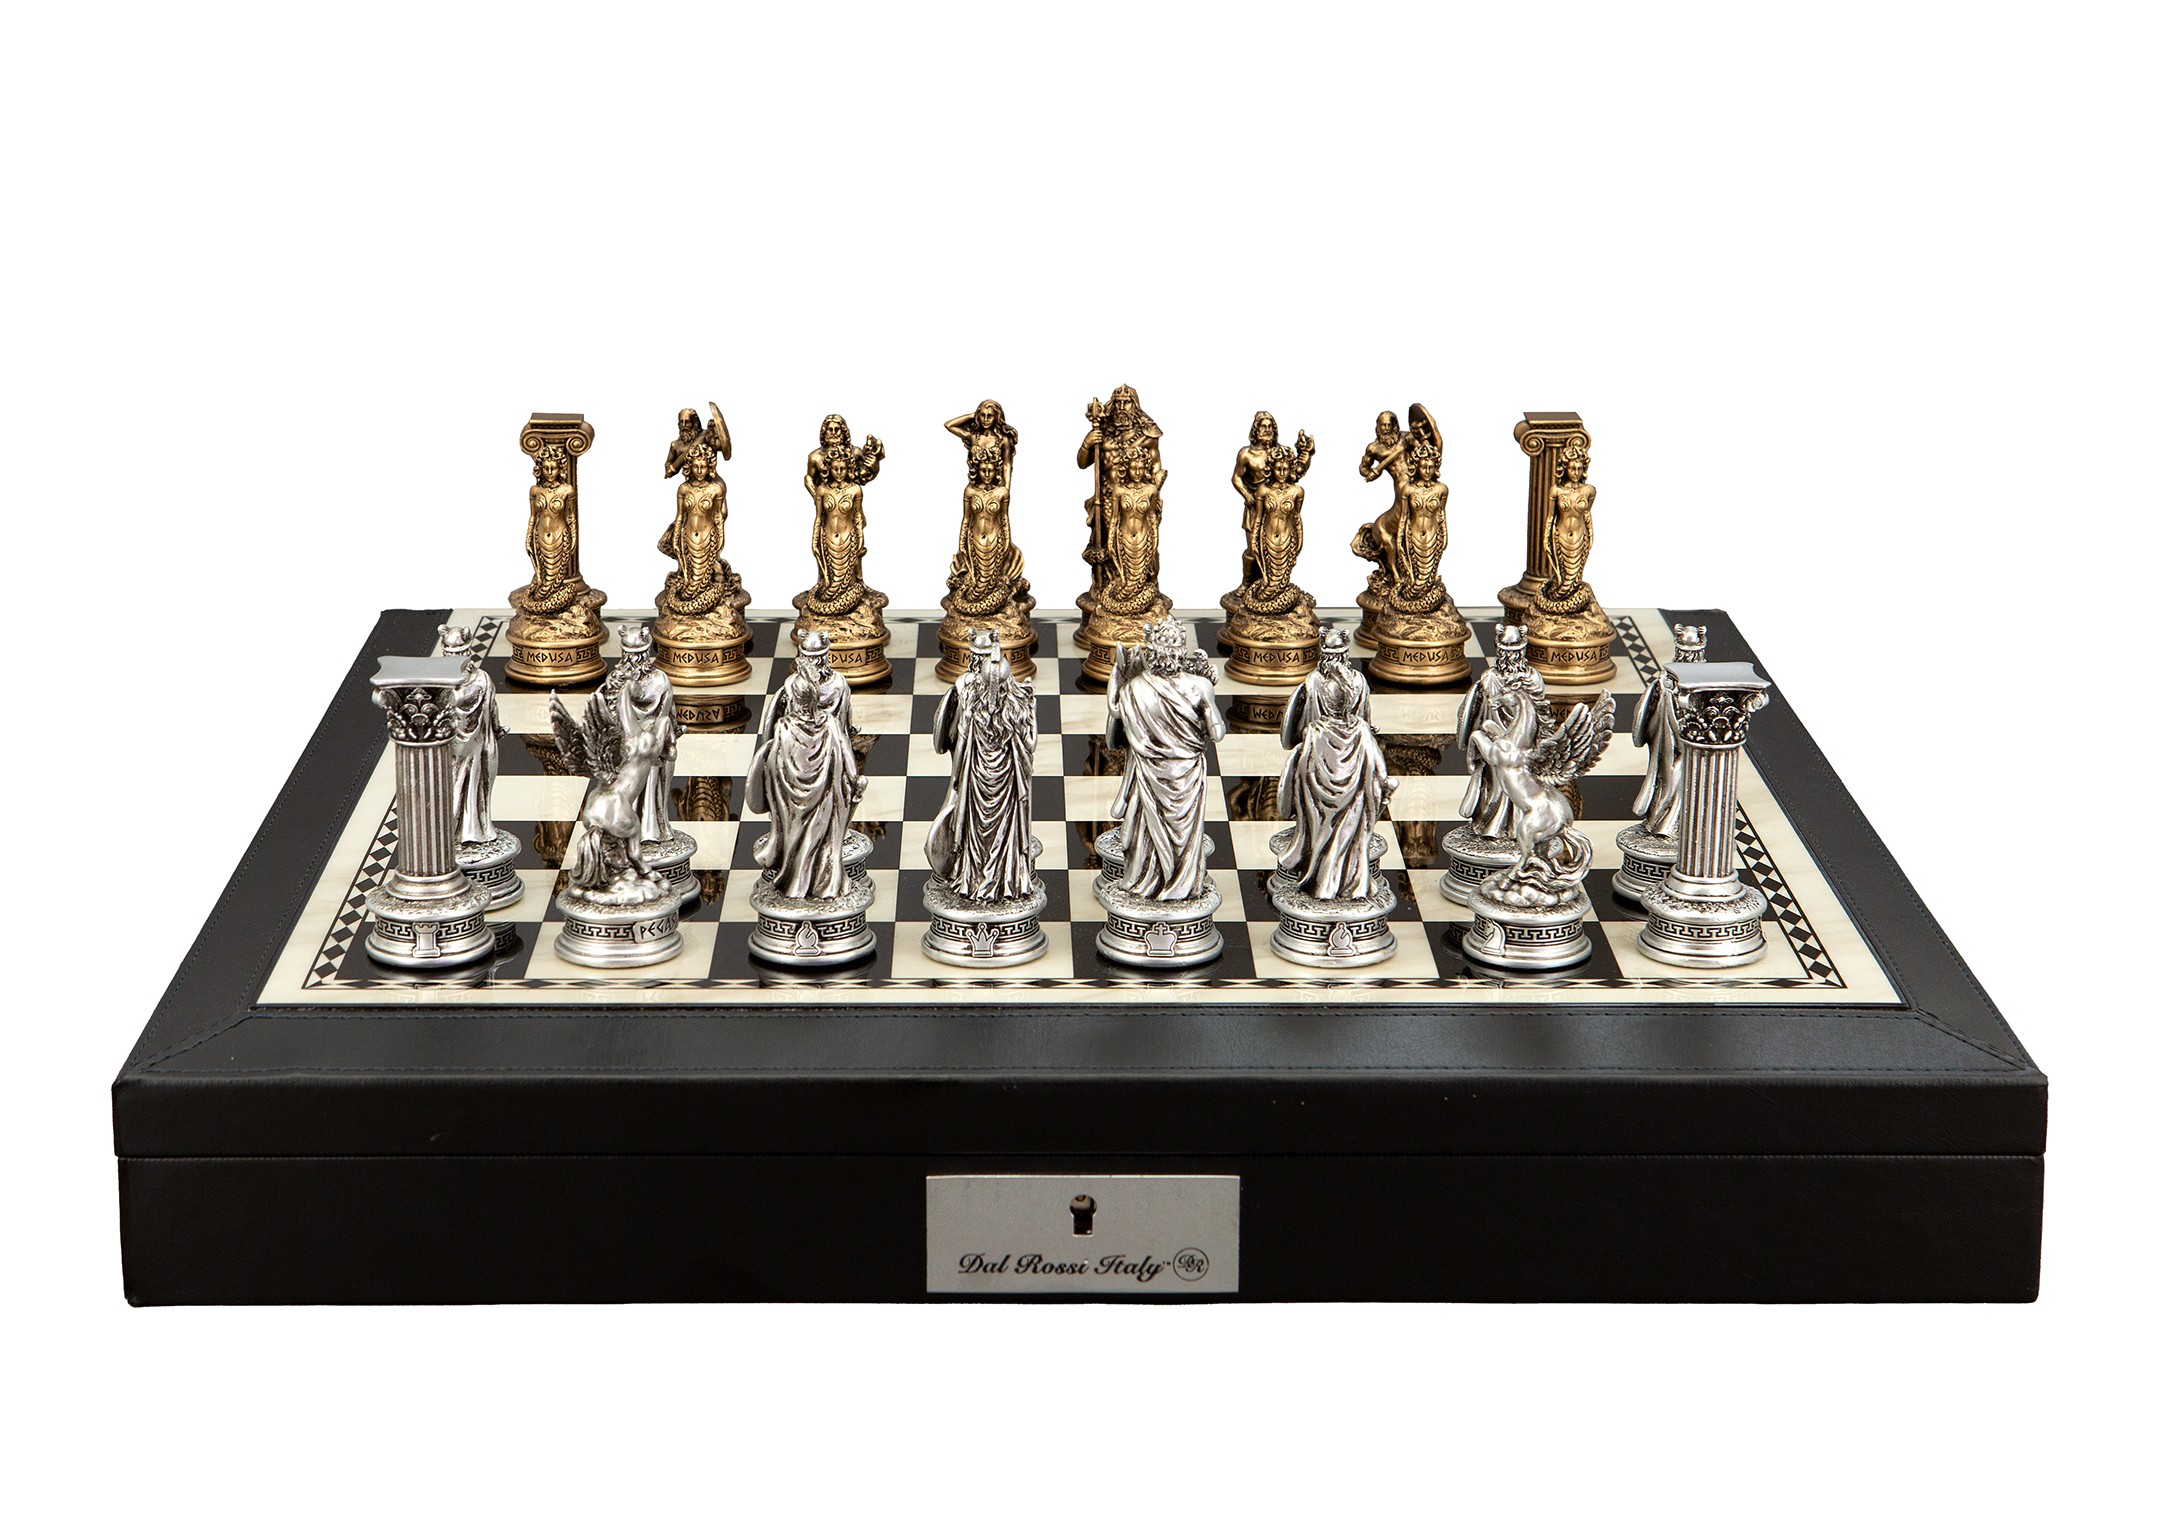 Dal Rossi Italy European Warriors Chessmen 85mm on a Black PU Leather Bevelled Edge chess box with compartments 18"